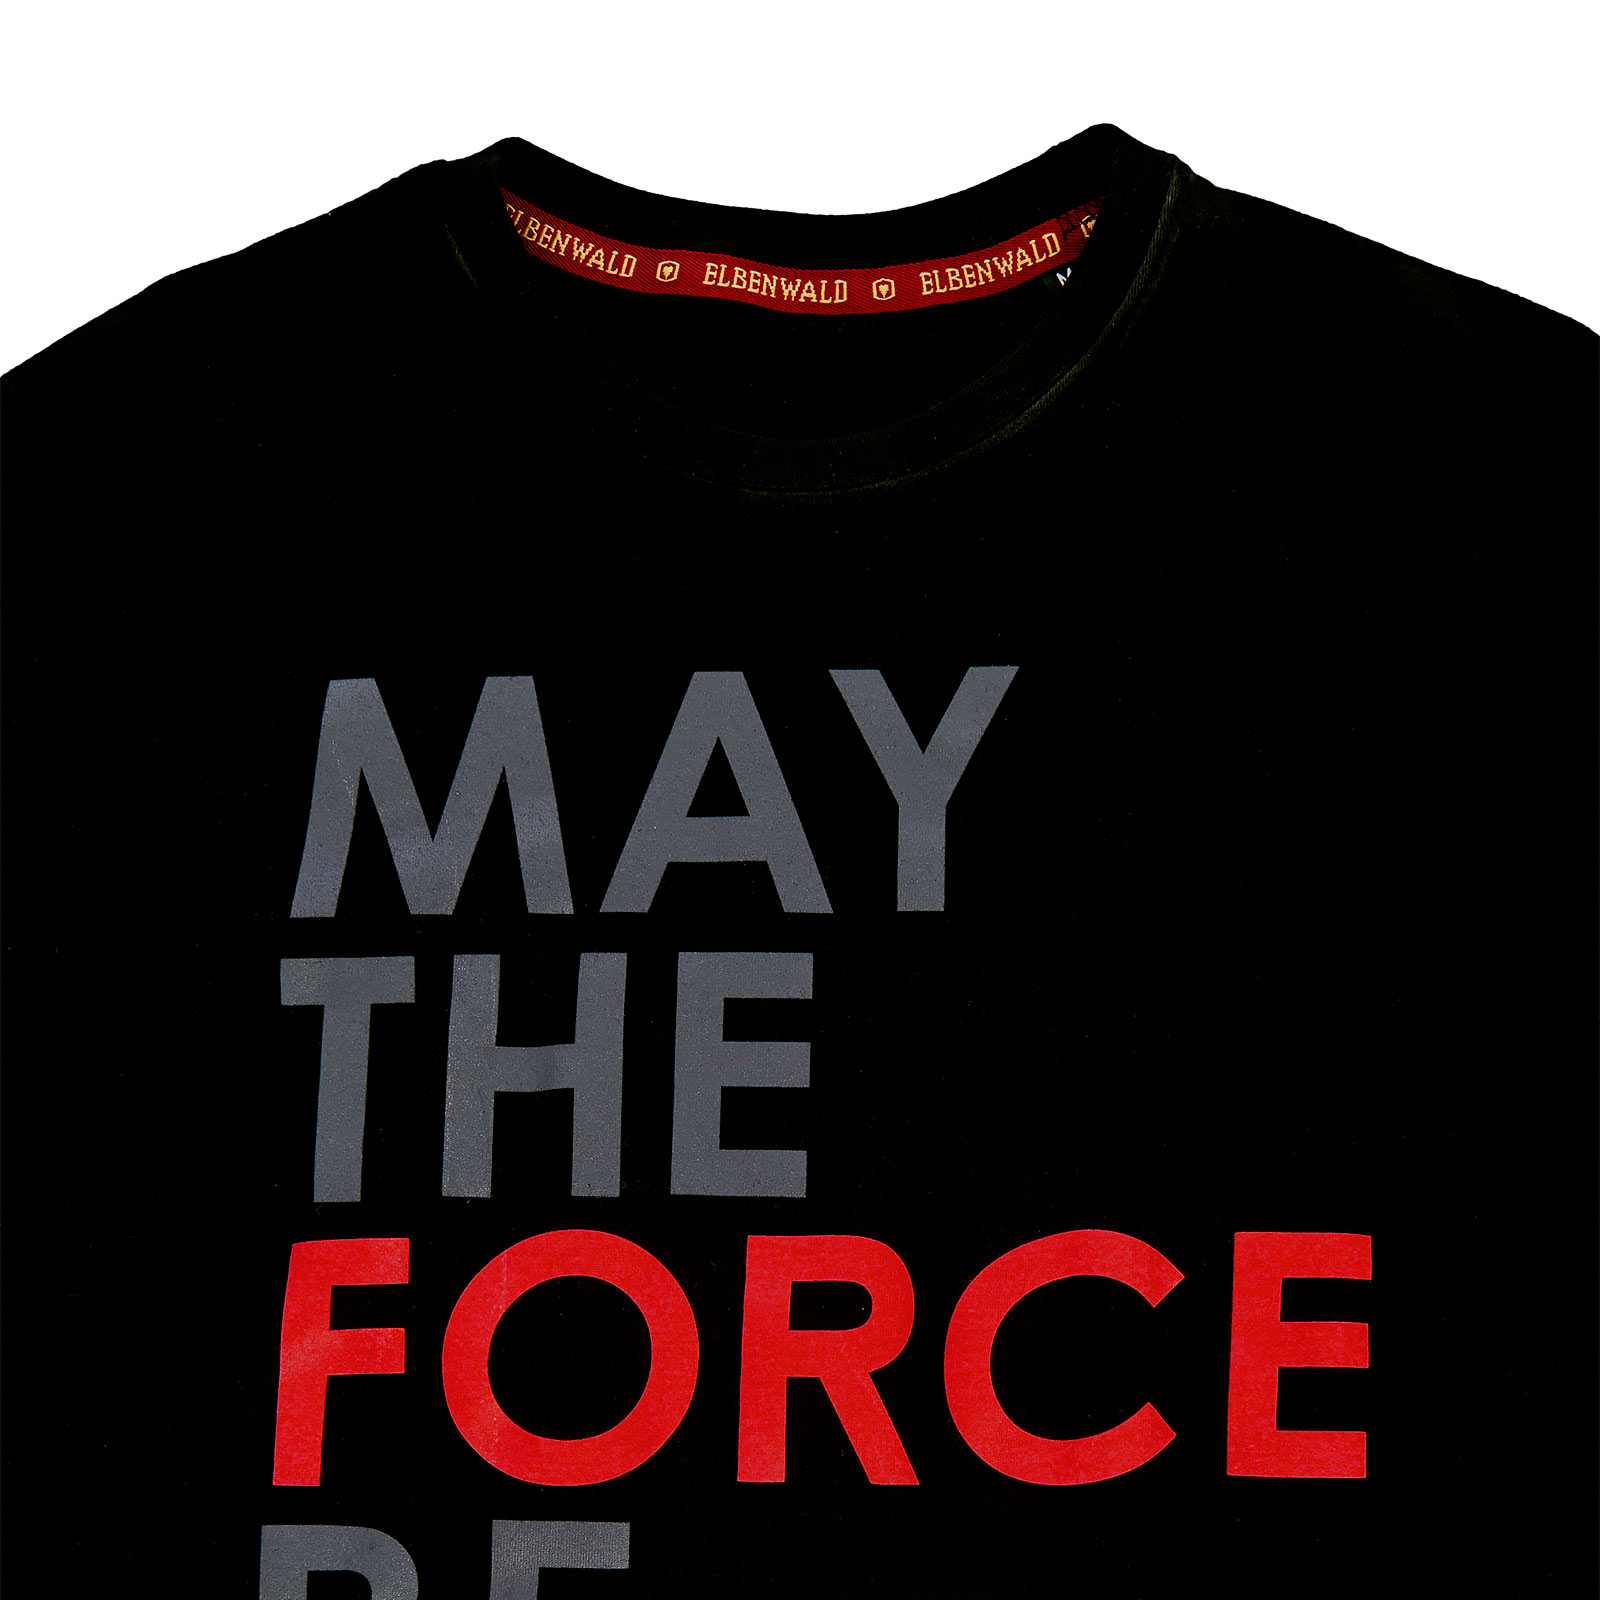 Star Wars - May the Force be with you T-Shirt